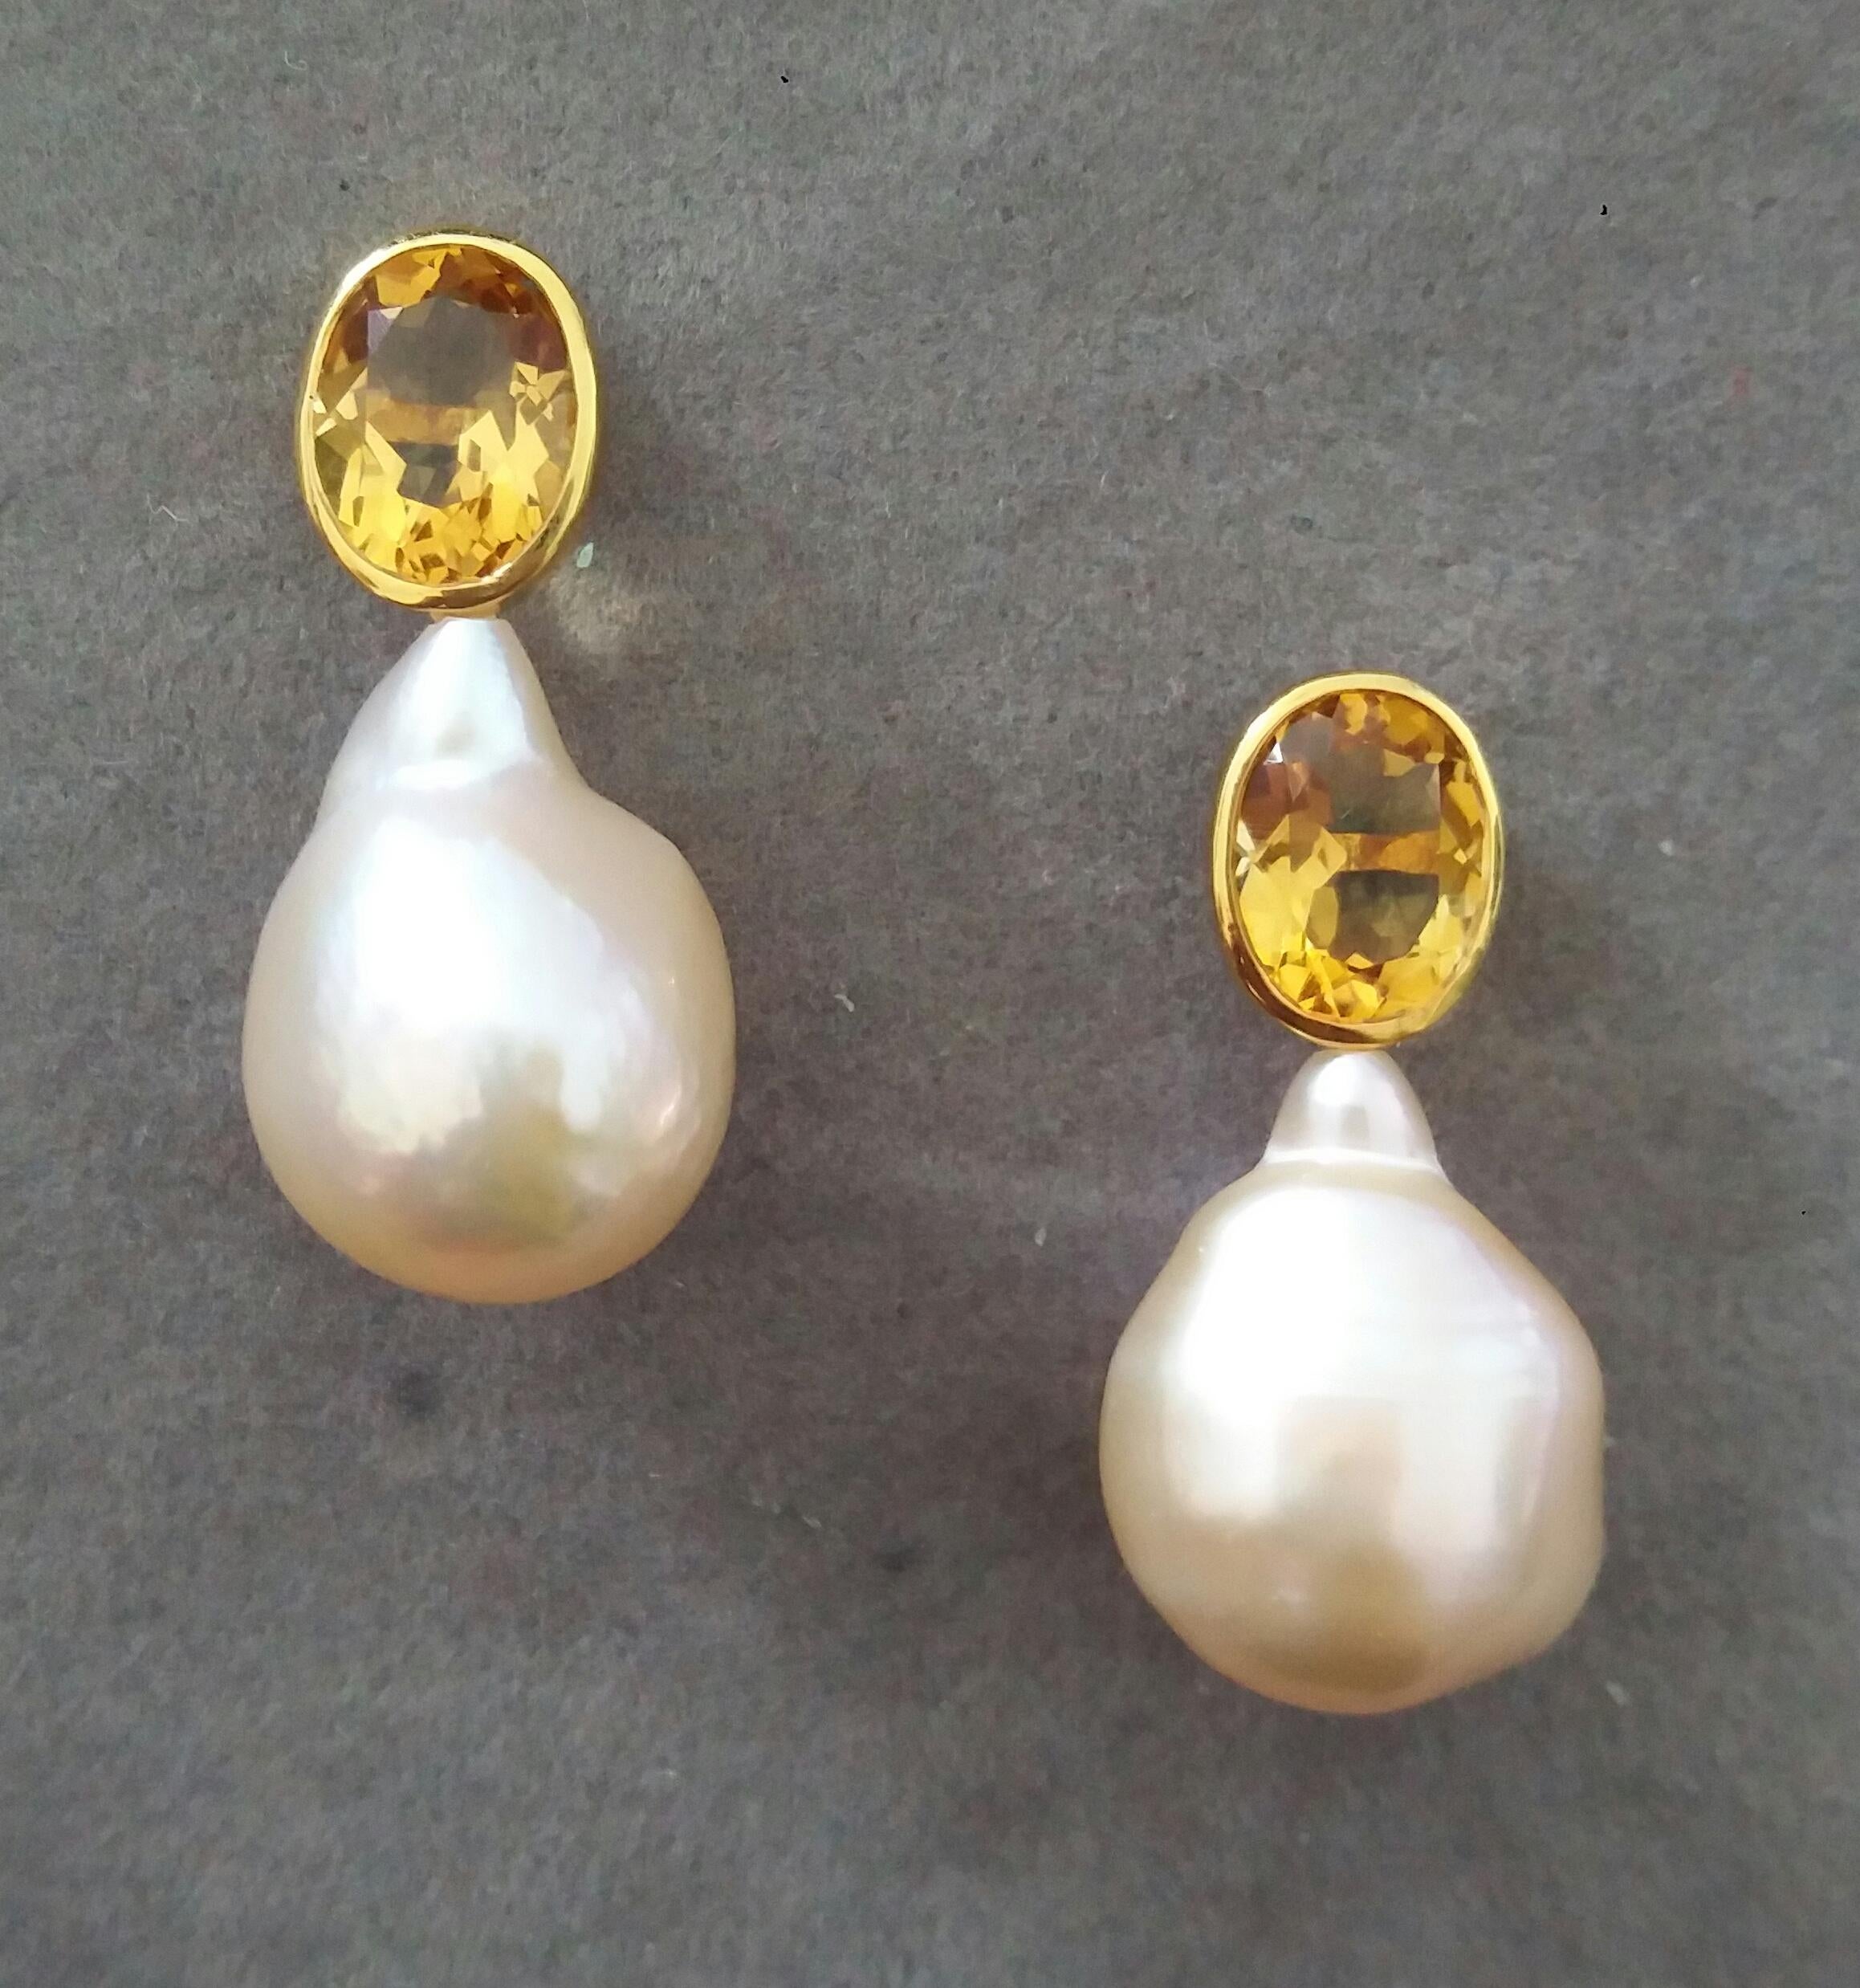 These simple but elegant and completely handmade earrings have 2 Oval Faceted  Natural Cognac Color Citrines measuring 7 x 9 mm set in yellow gold bezel at the top to which are suspended 2  Pear Shape Baroque Cream Pearls measuring 14x17 mm.

In